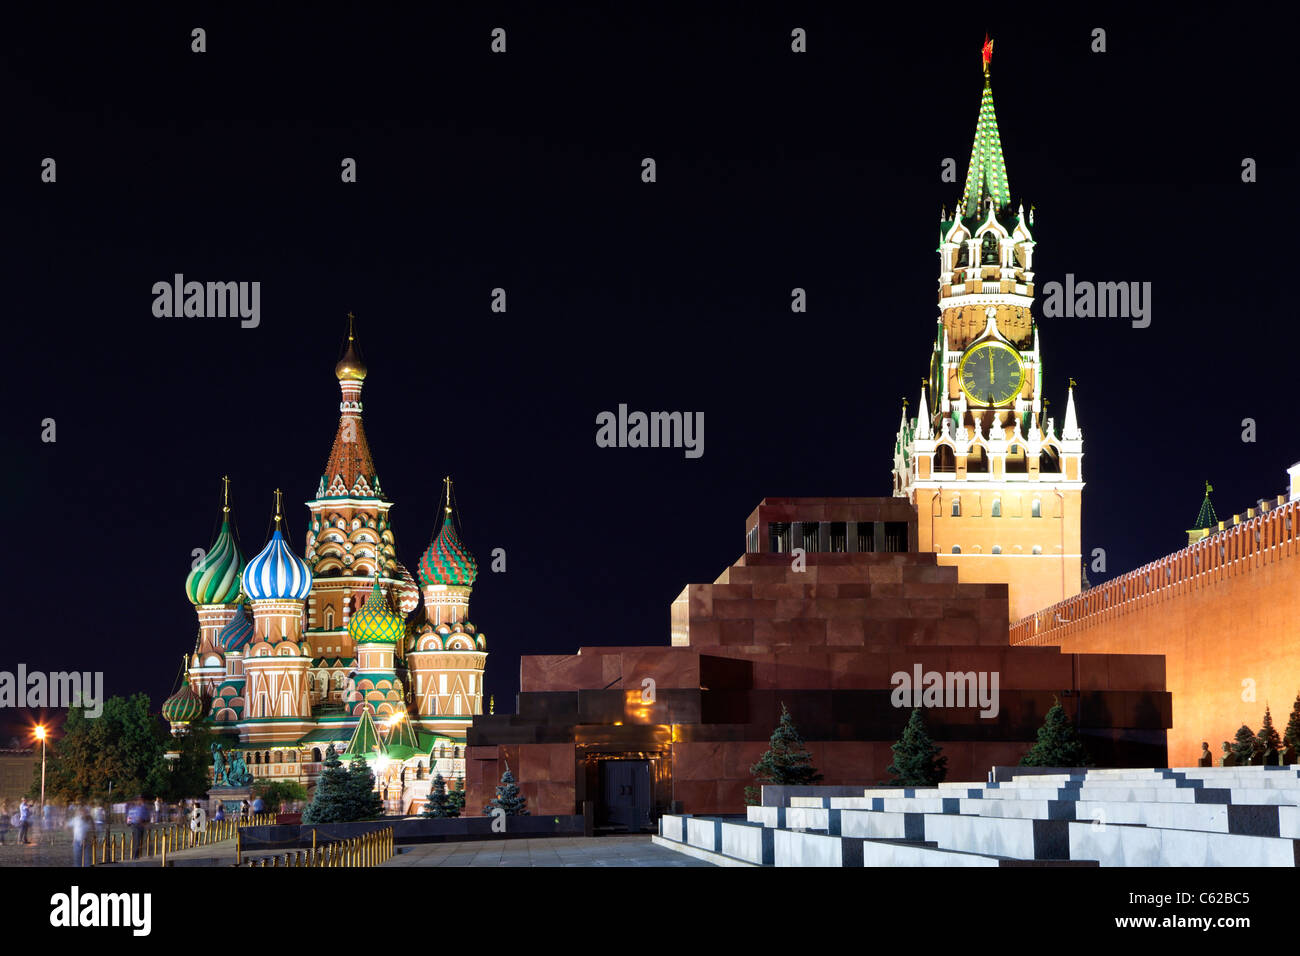 Red Square at night. View of St. Basil's Cathedral, the Spassky Tower and the Mausoleum of Lenin. Moscow. Russia. Stock Photo